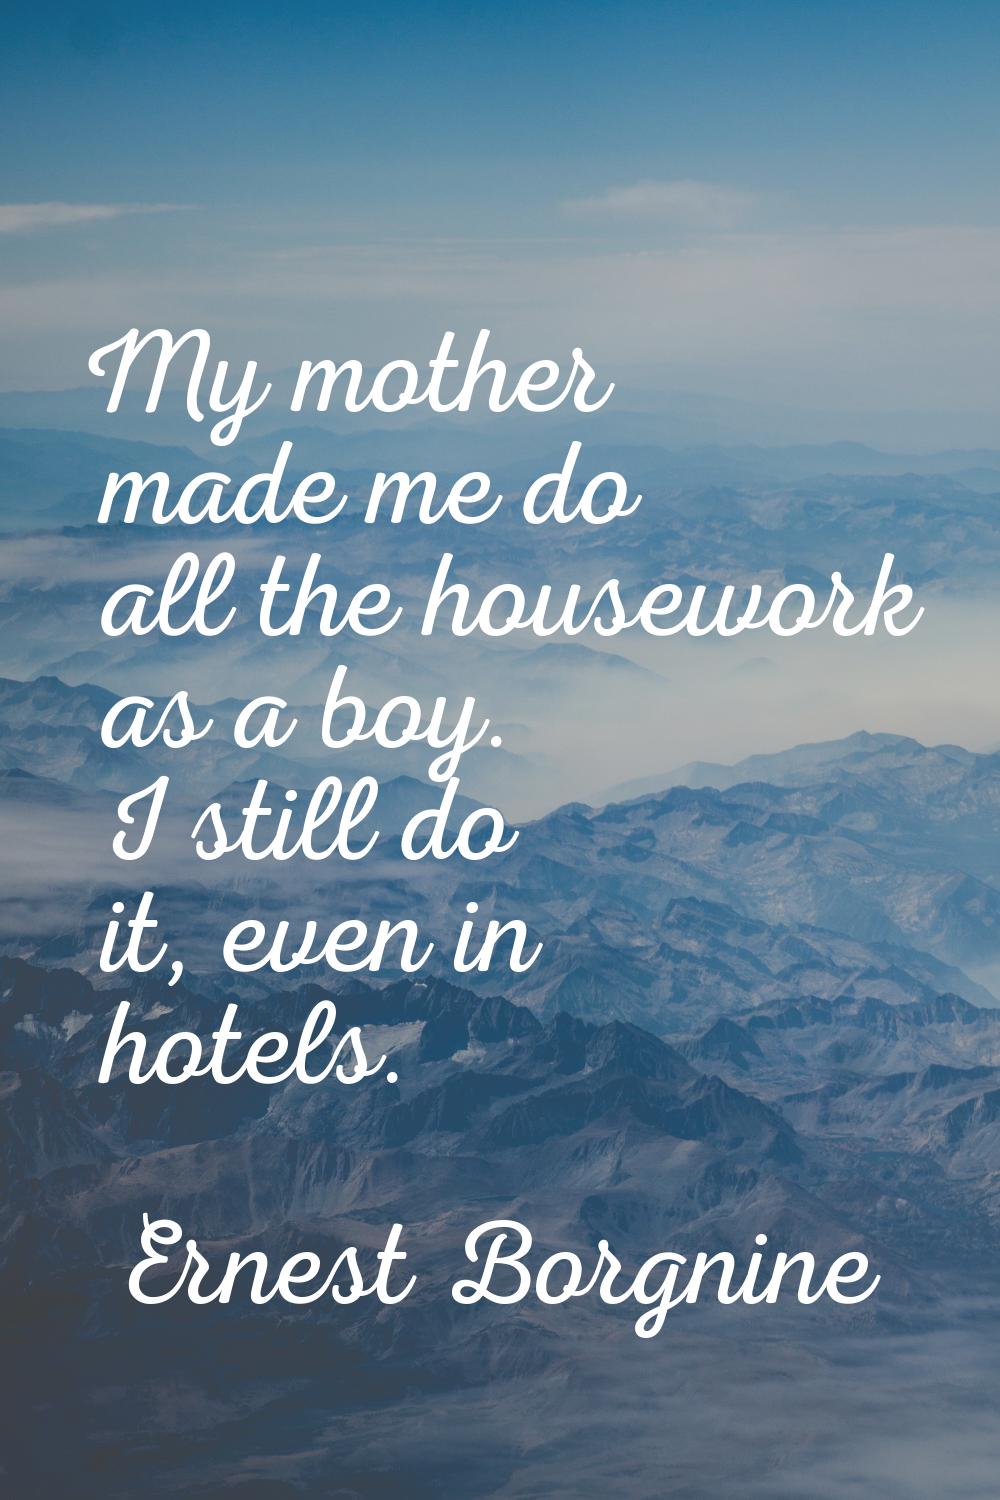 My mother made me do all the housework as a boy. I still do it, even in hotels.